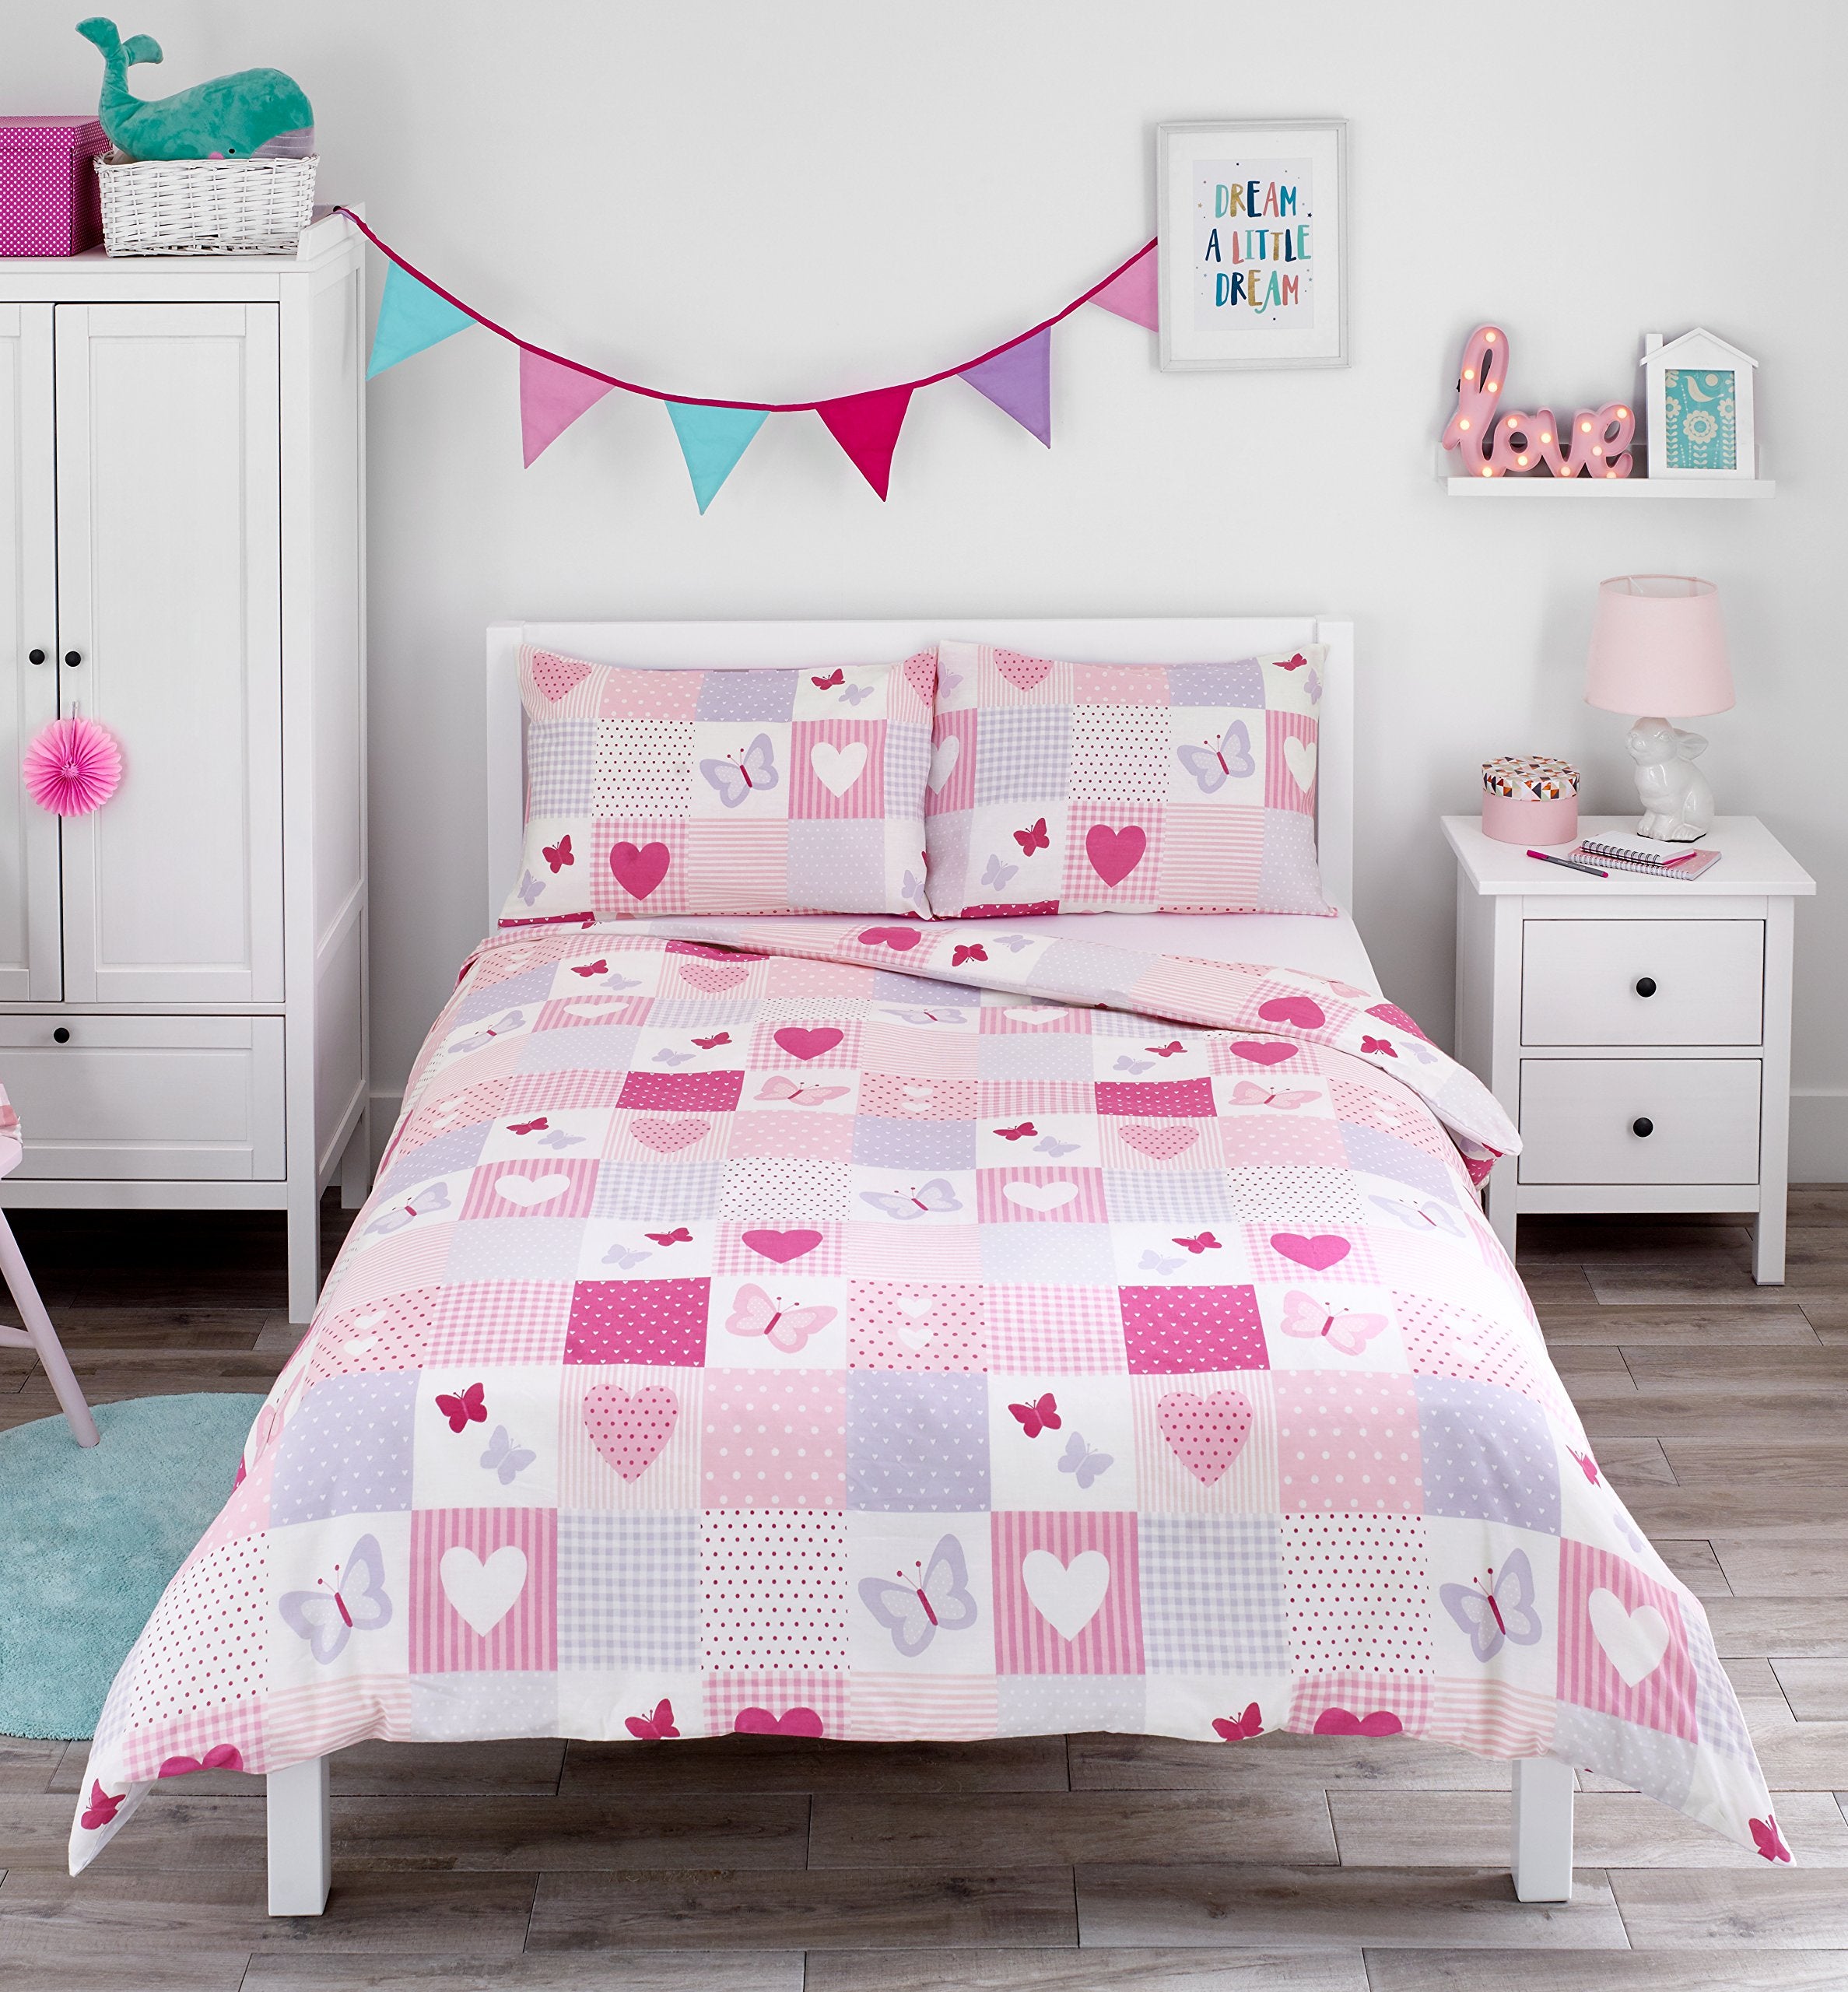 Bloomsbury Mill - Hearts & Butterflies Patchwork - Bedding Set - Pink - Double Duvet Cover and 2 Pillowcases